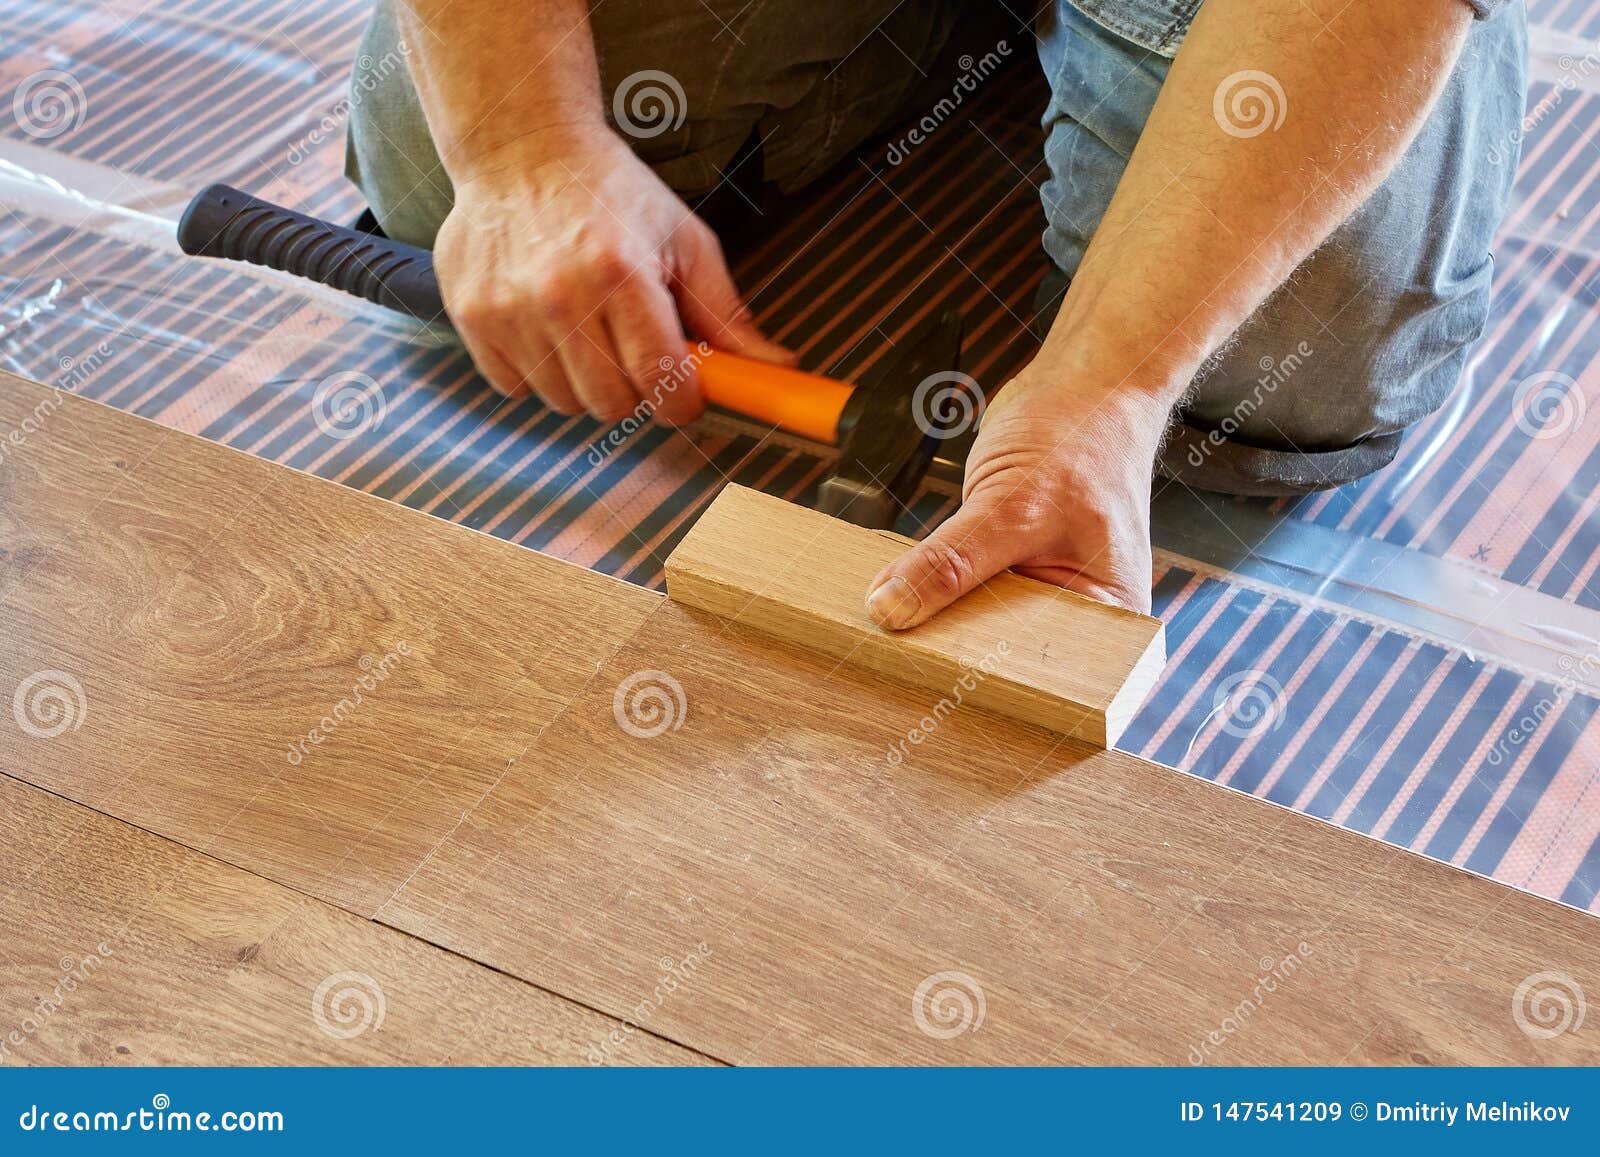 Laying Laminate Covering On Heat Insulated Floor Stock Image